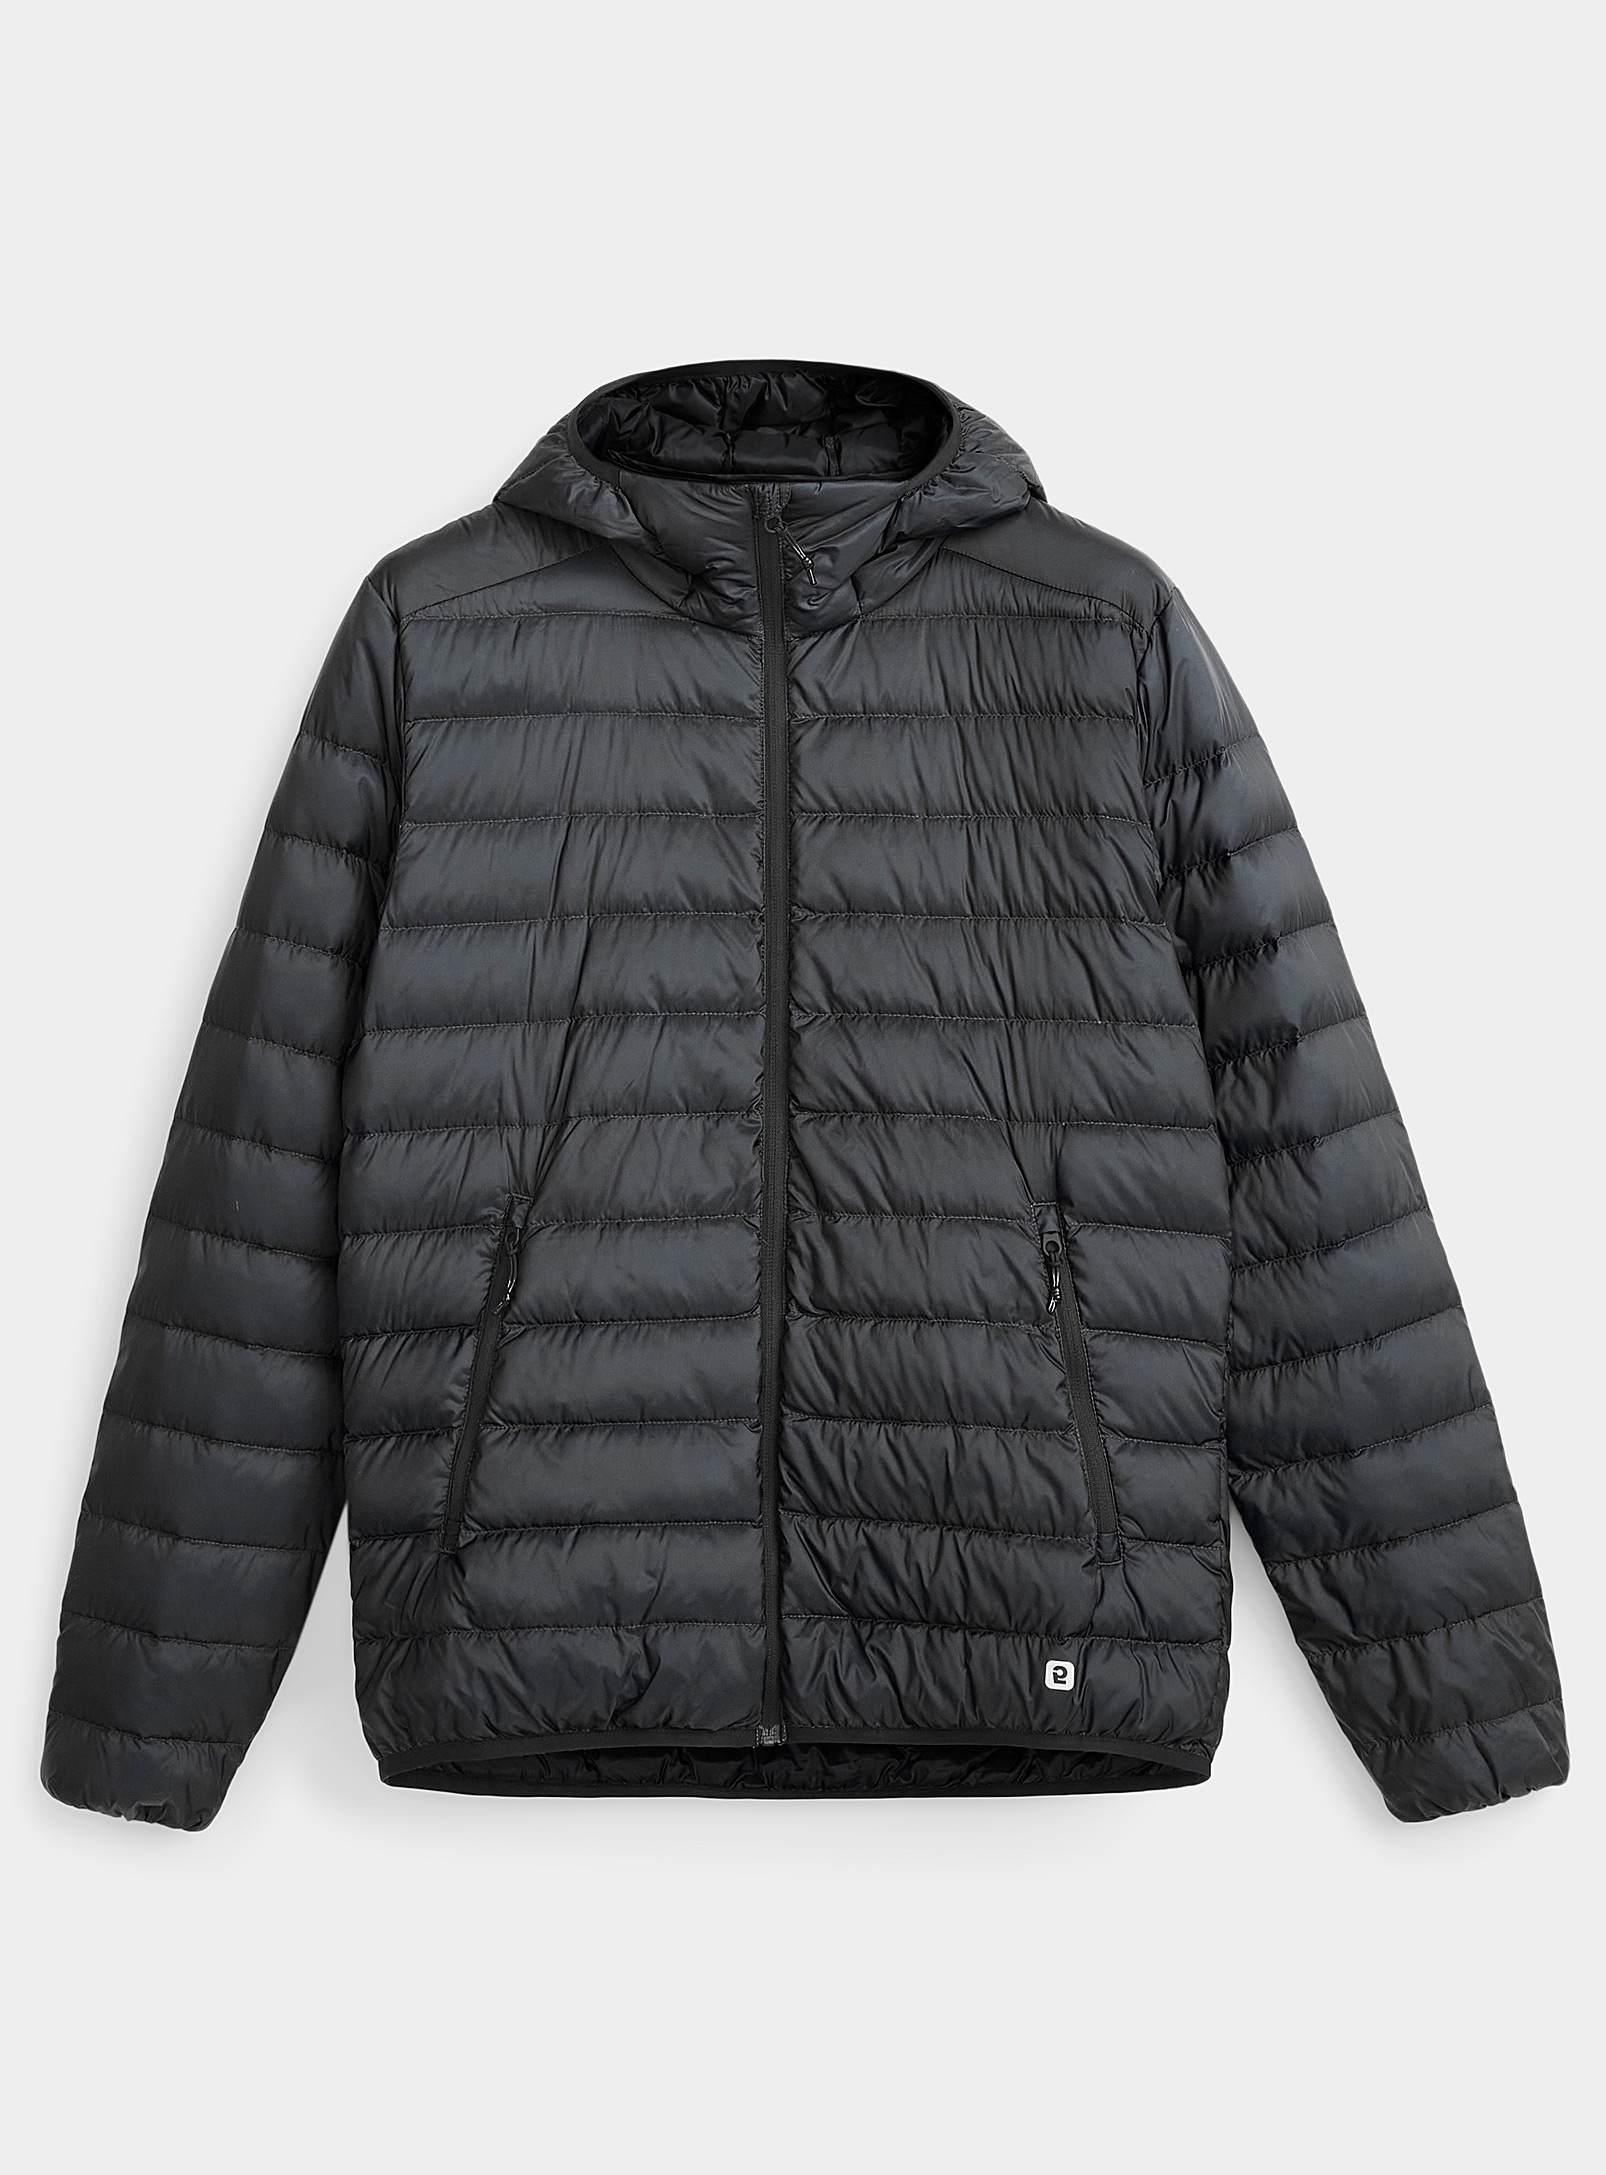 I.FIV5 - Men's Recycled nylon packable puffer jacket